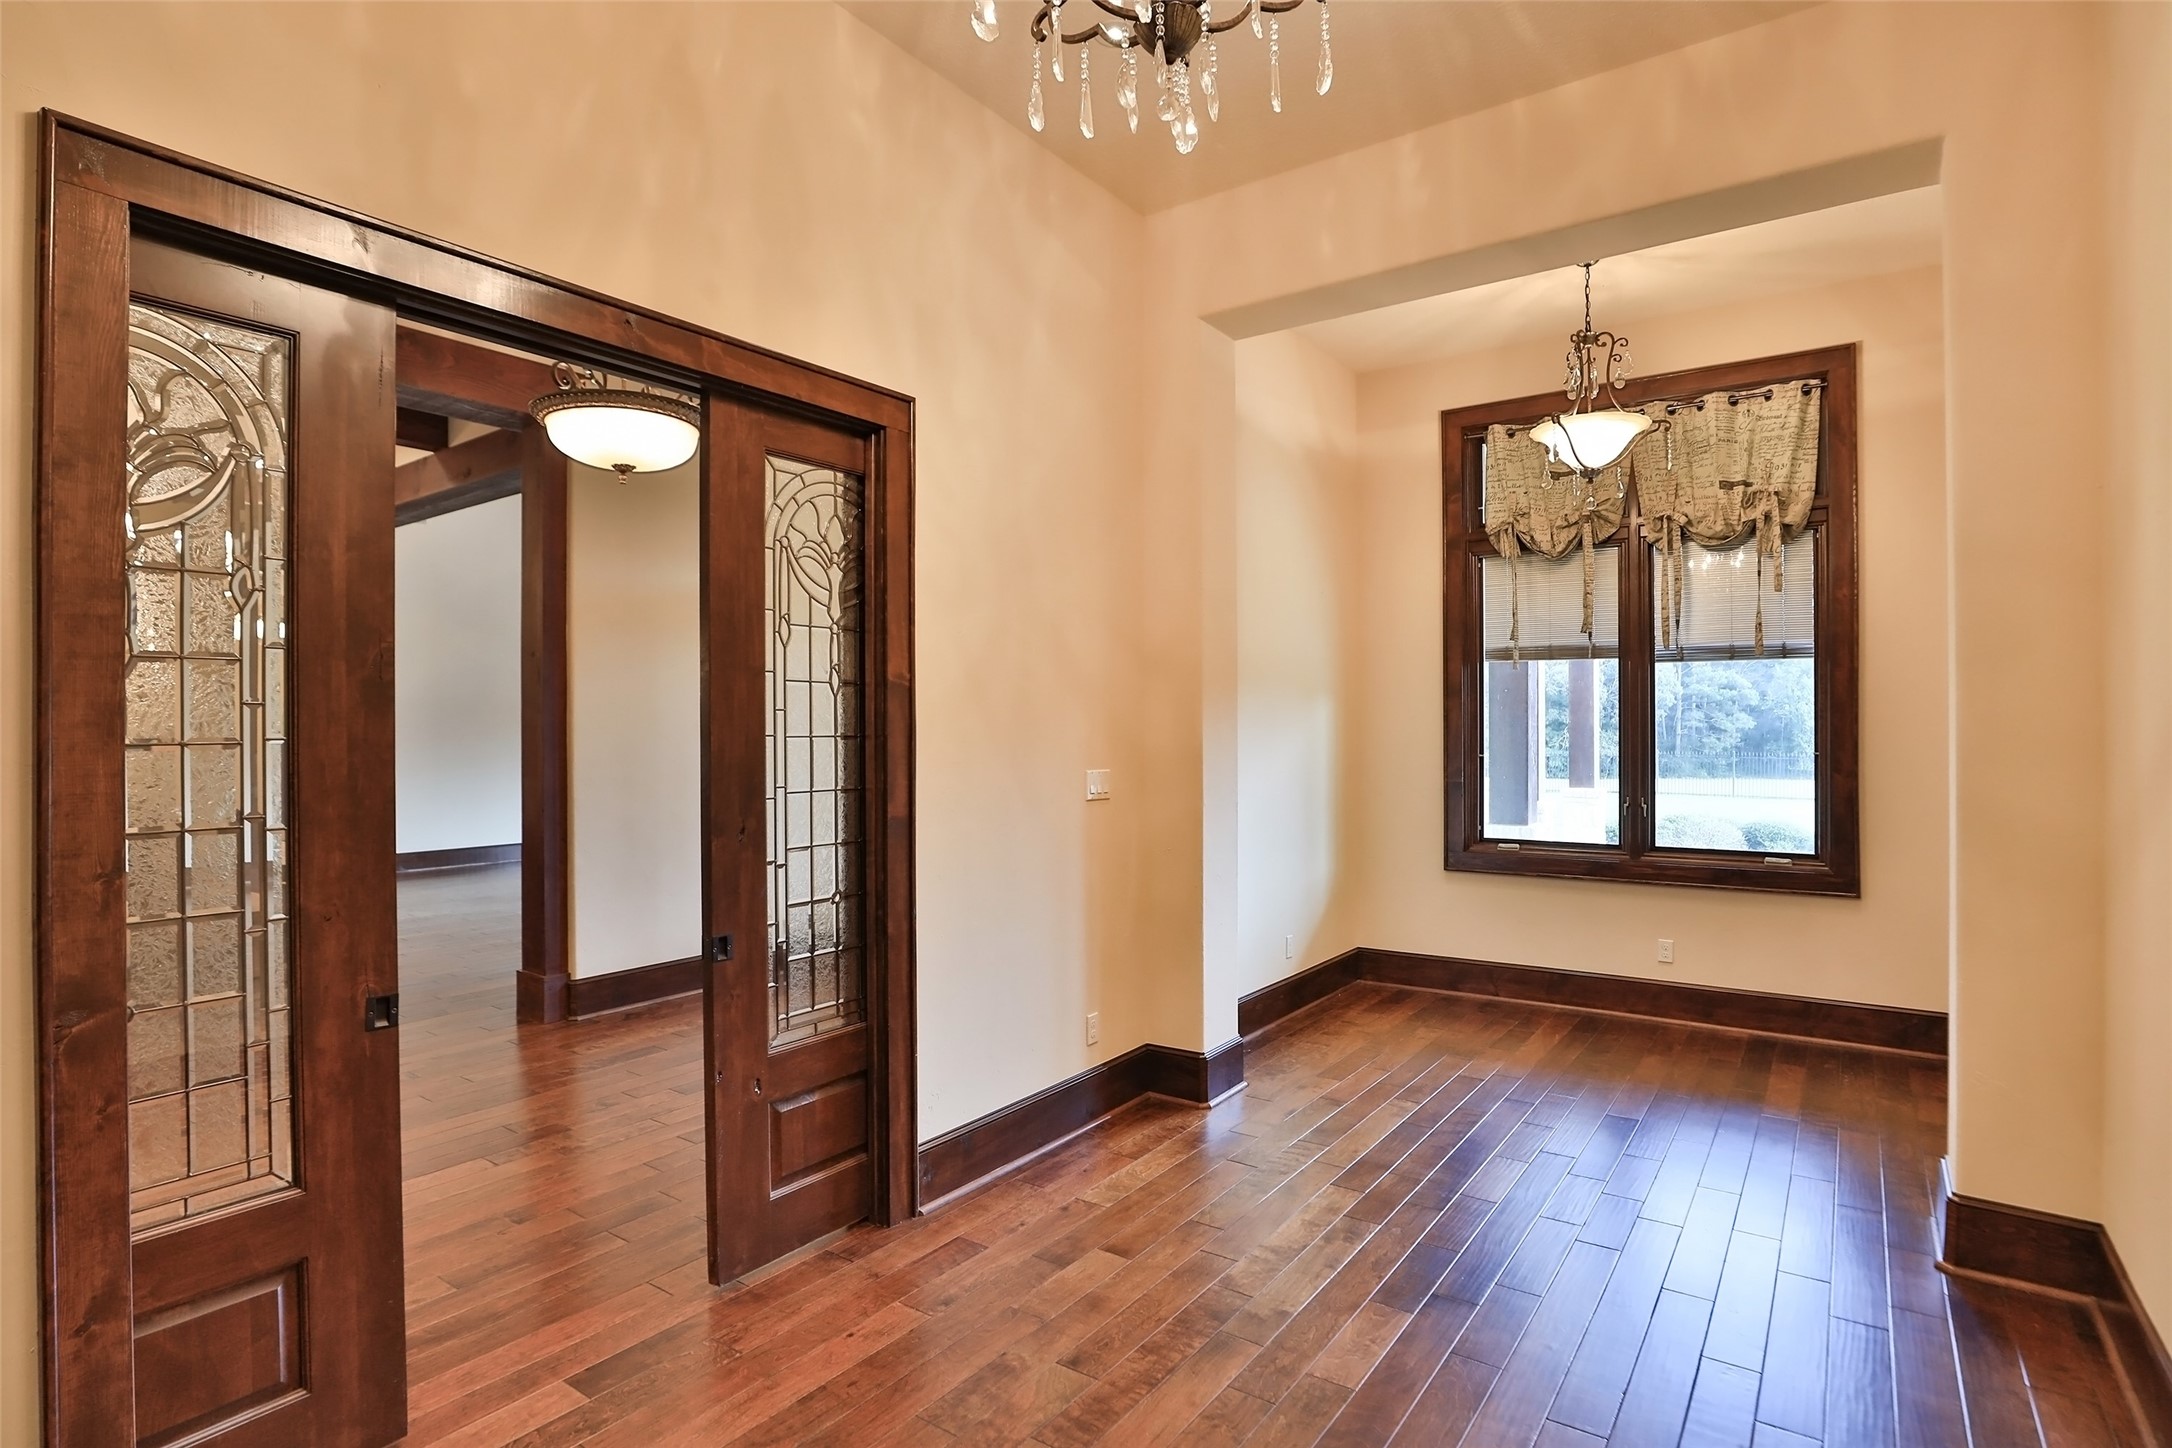 This picture is another view of the music room. Beautiful wood and glass sliding doors provide the privacy you would like.